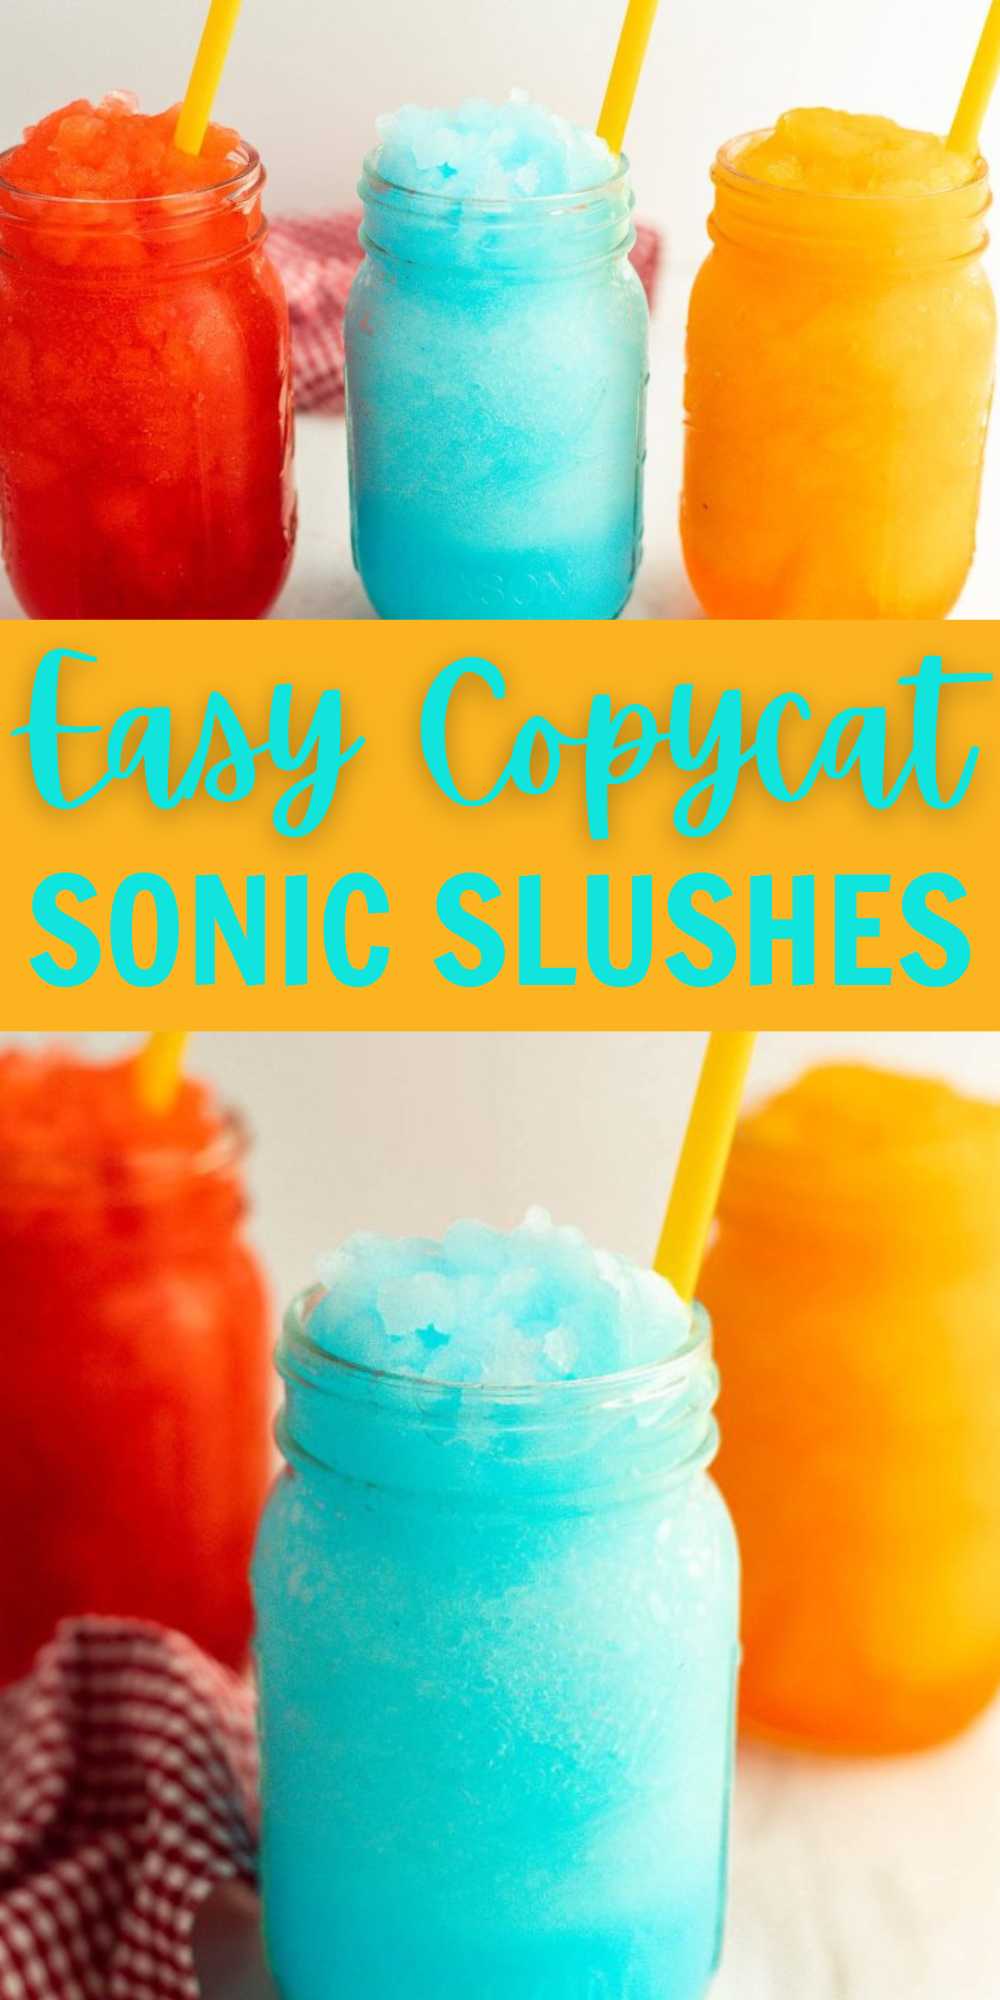 These Copycat Sonic Slushes is perfect for the summer. They are loaded with flavor and easy to make. Simple ingredients make these tasty. With the excitement of summertime upon us, reward the kids with their favorite slush. All you need is 4 simple ingredients to make sonic slushies at home. #eatingonadime #copycatsonicslushes #sonicslushes